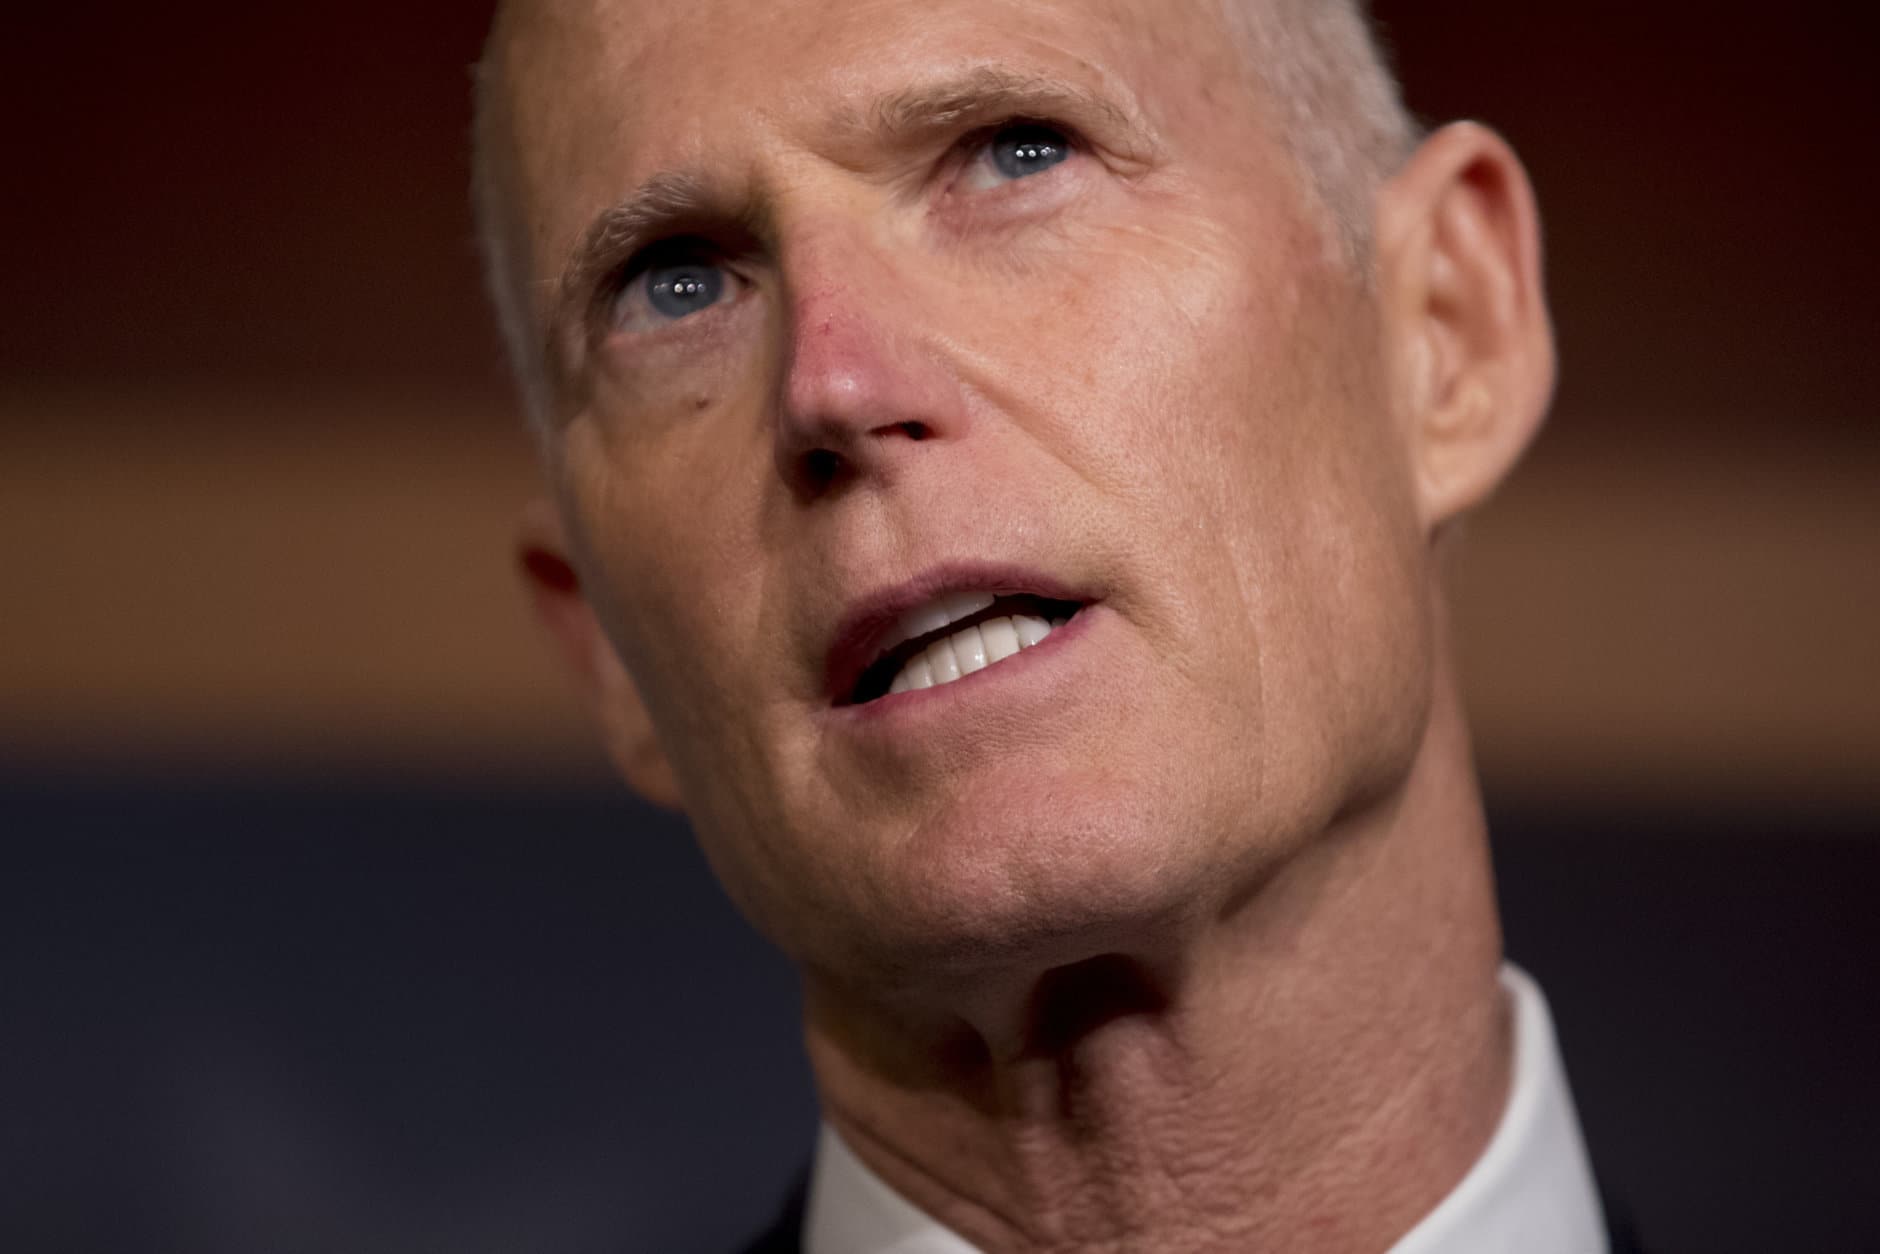 Sen. Rick Scott, R-Fla., discusses the government shutdown during a news conference on Capitol Hill in Washington, Thursday, Jan. 17, 2019. (AP Photo/Andrew Harnik)